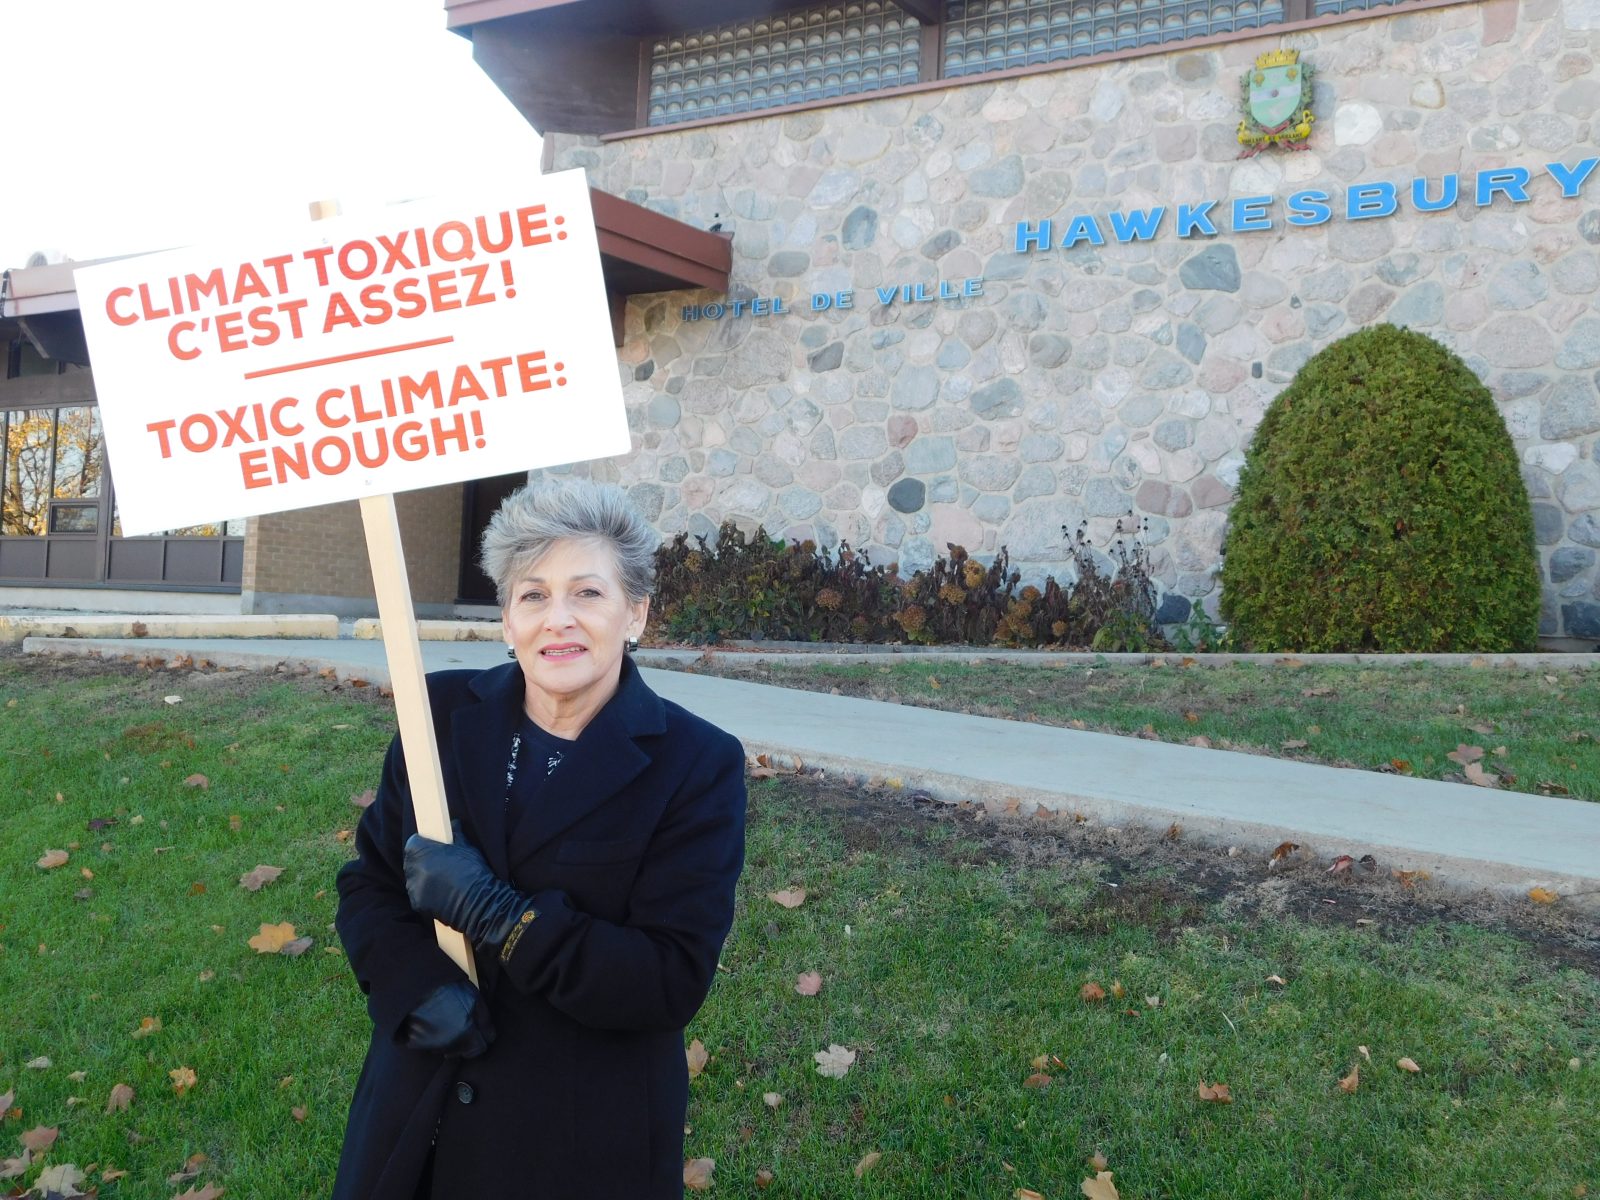 Mayor protests “toxic atmosphere” on Hawkesbury council